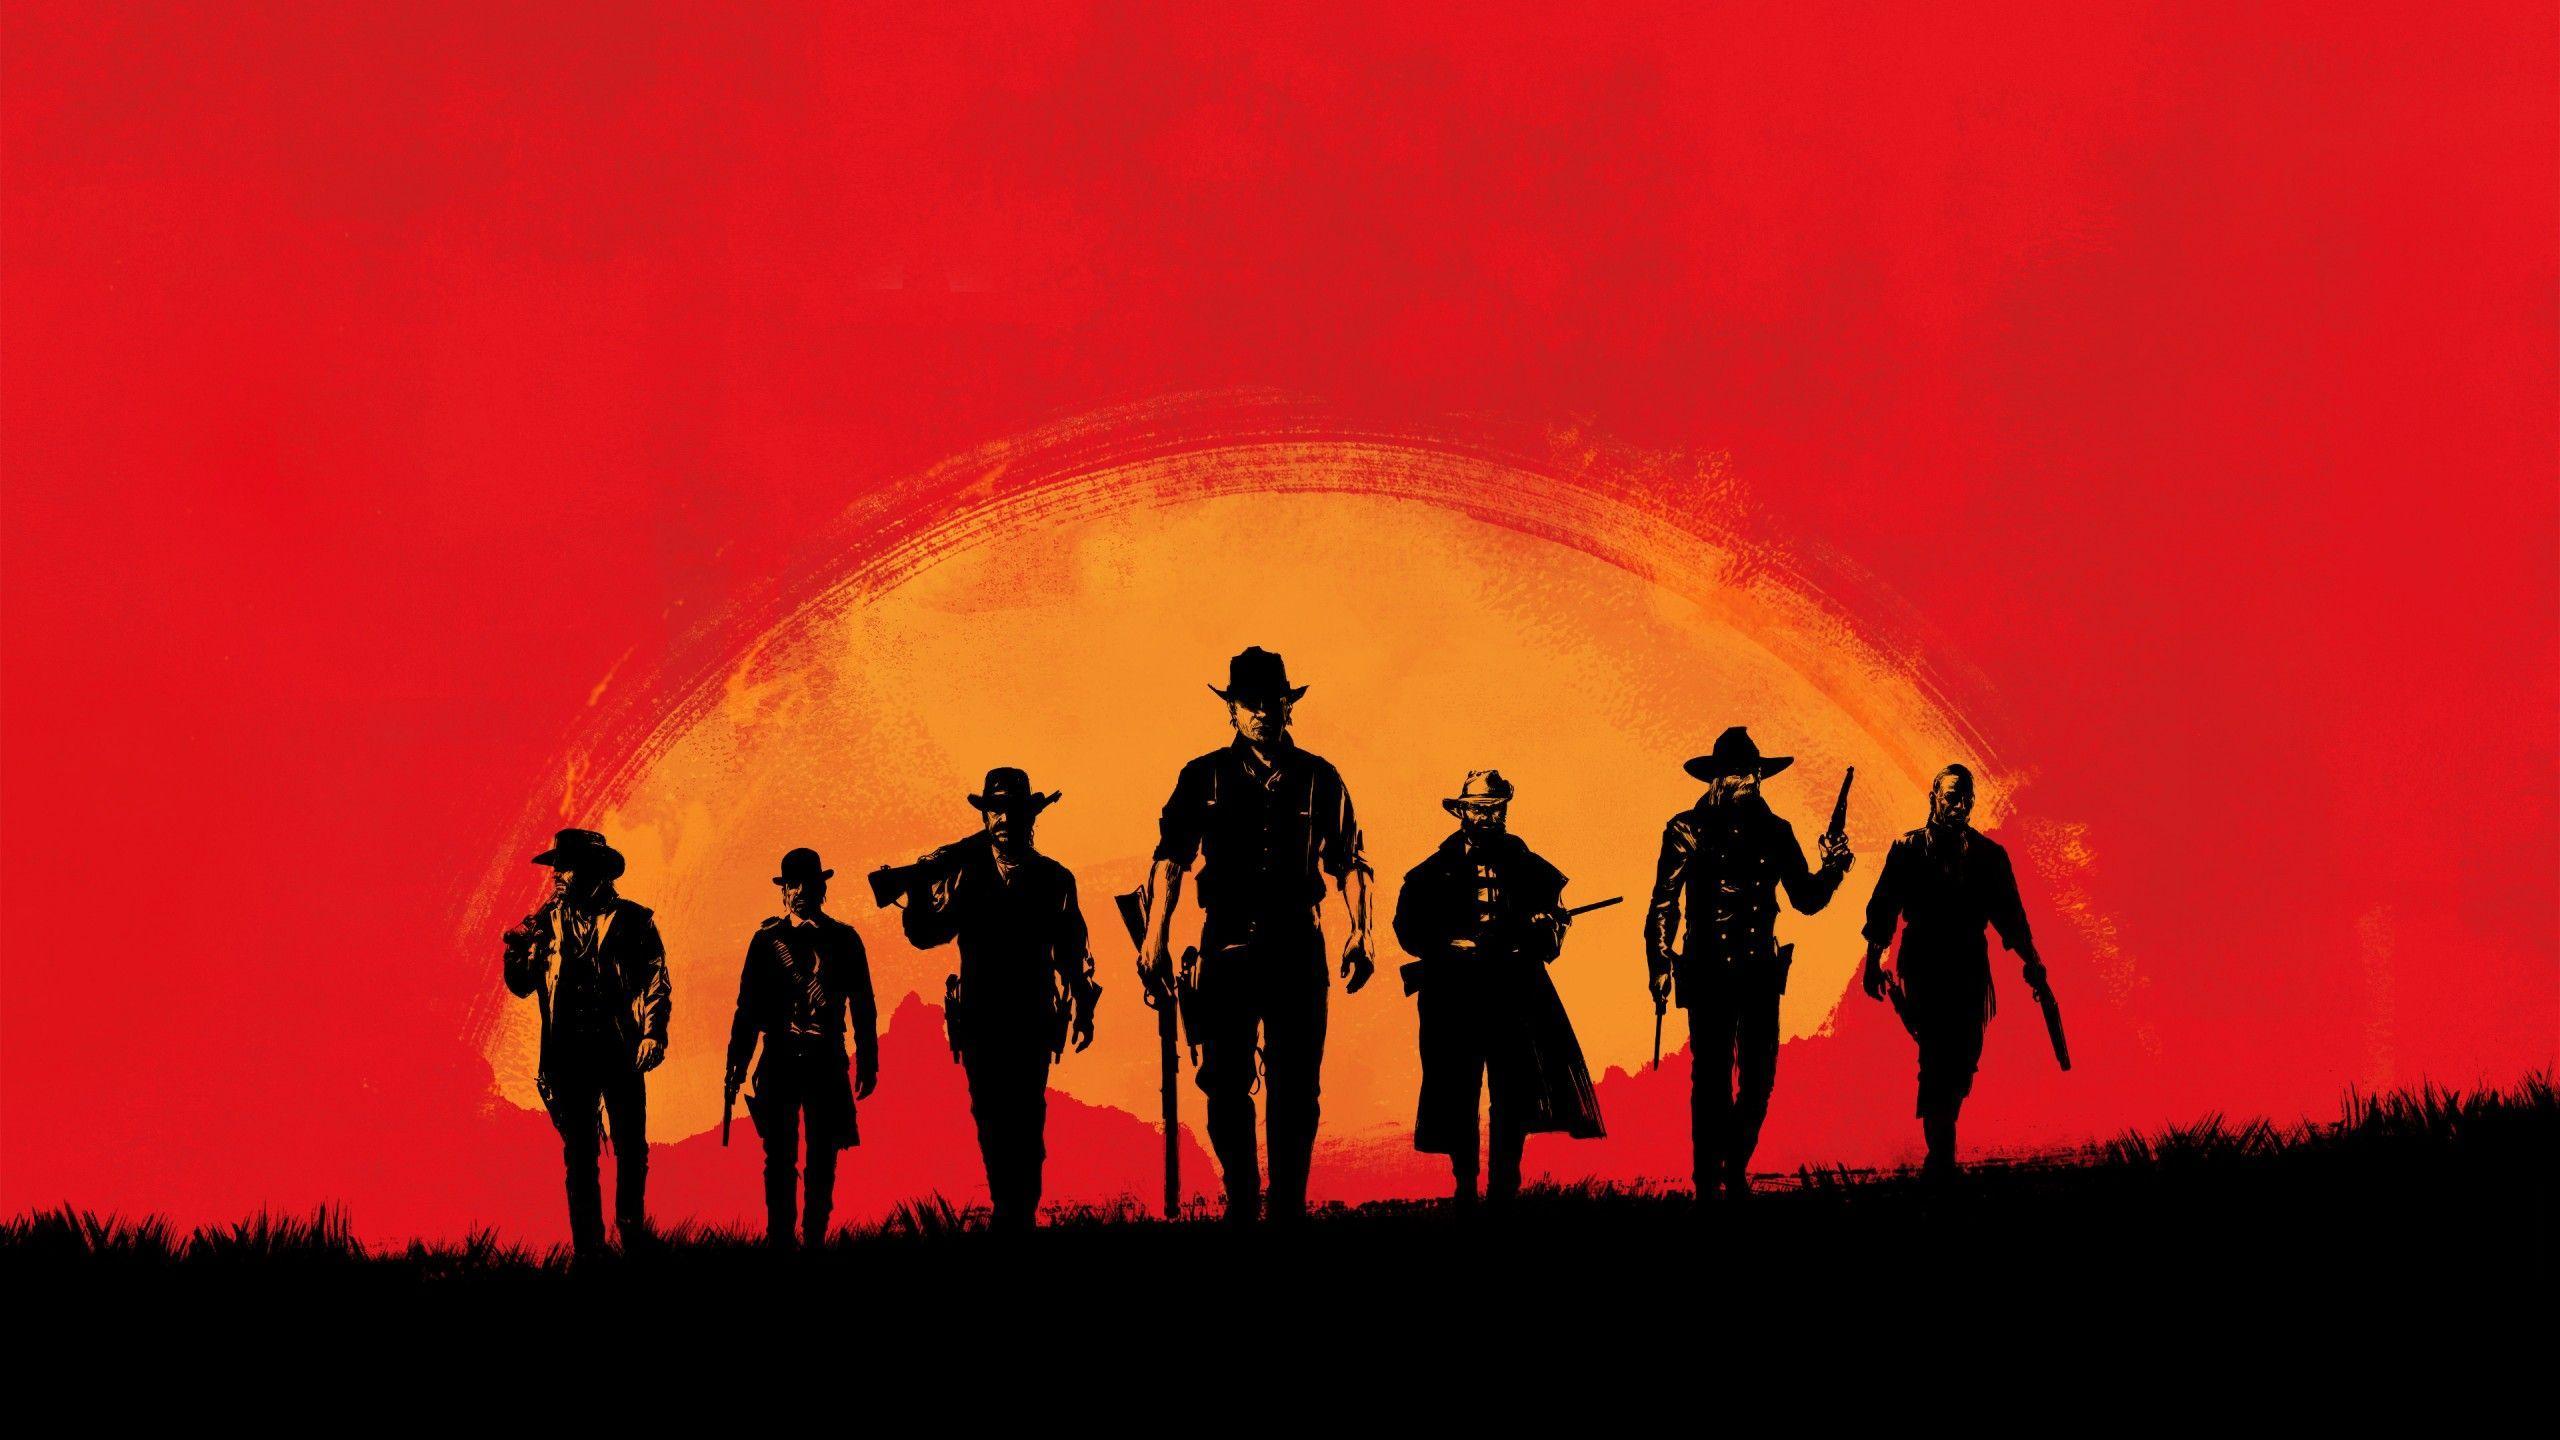 2560 x 1440 · jpeg - Red Dead Redemption 2 Wallpapers - Wallpaper Cave